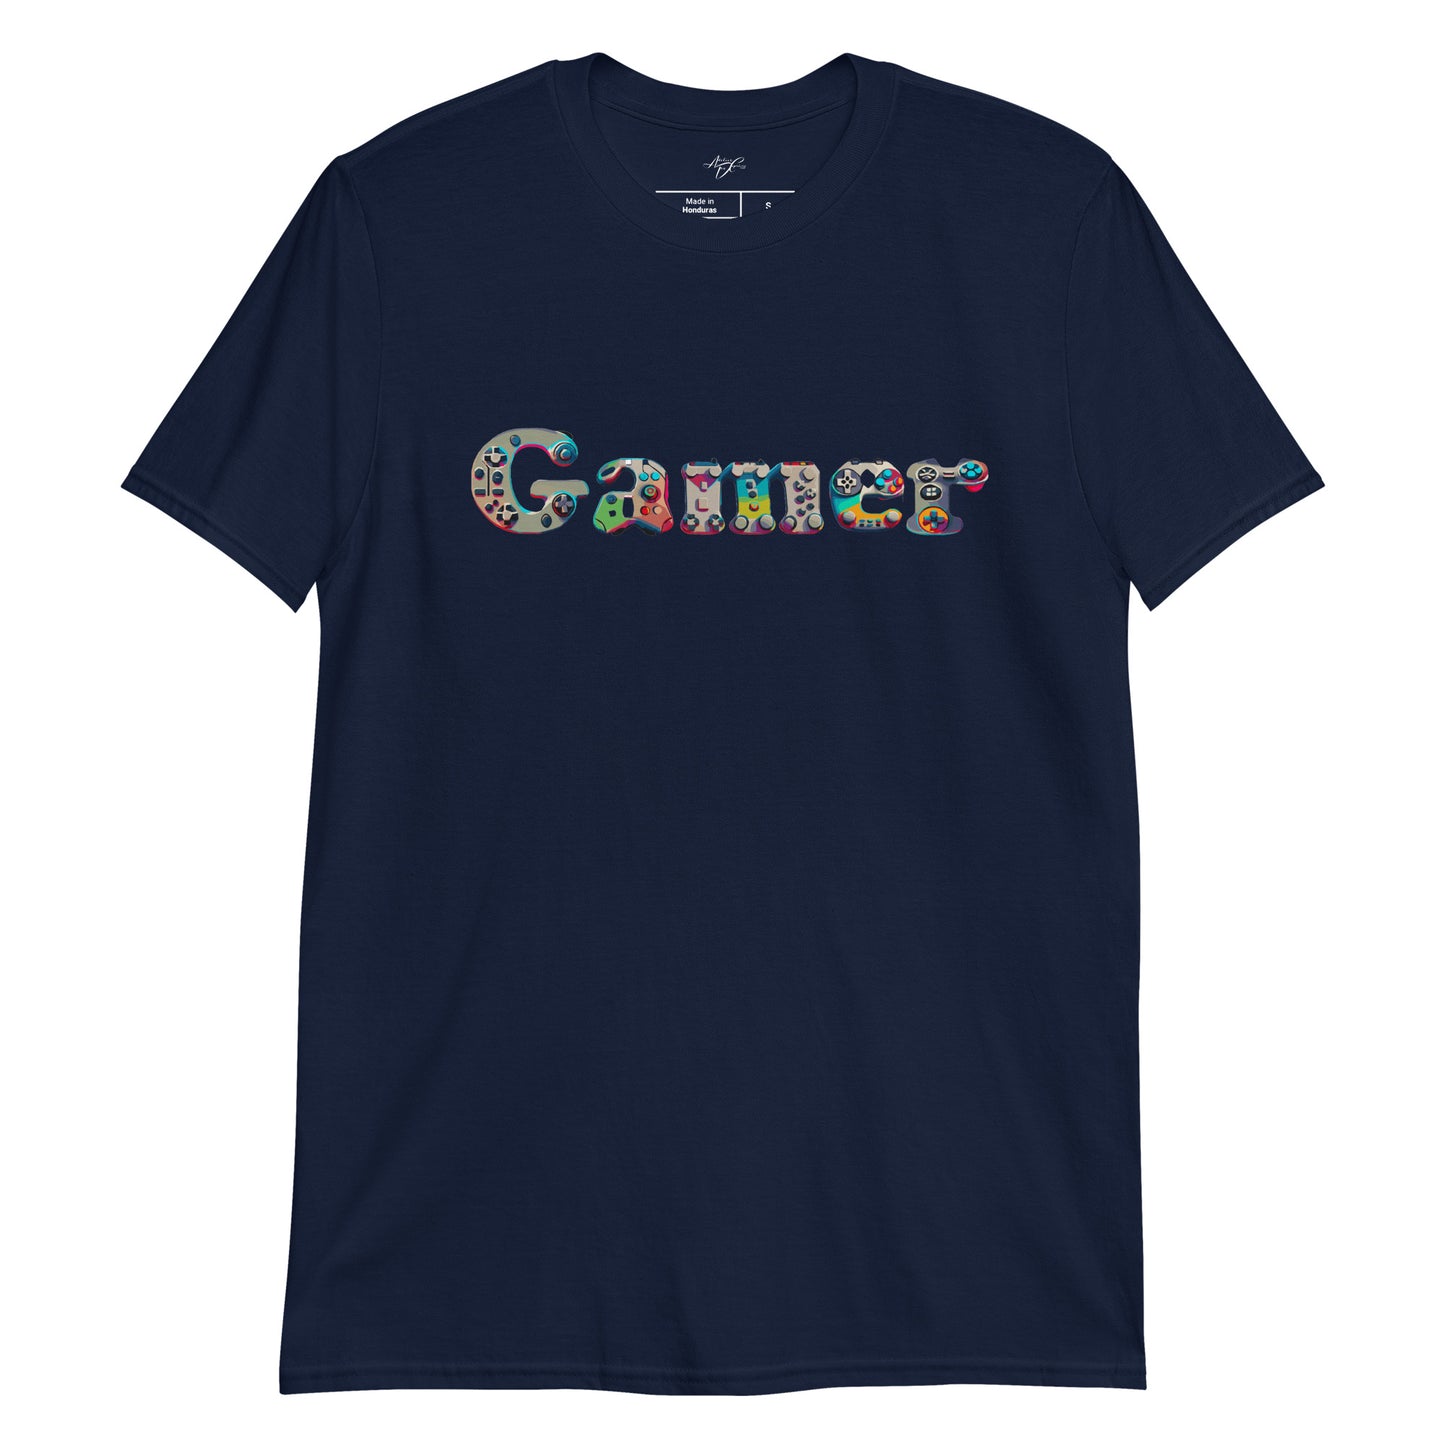 Exclusive 'Gamer' Motif Softstyle T-Shirt by Atelier Des Caprices